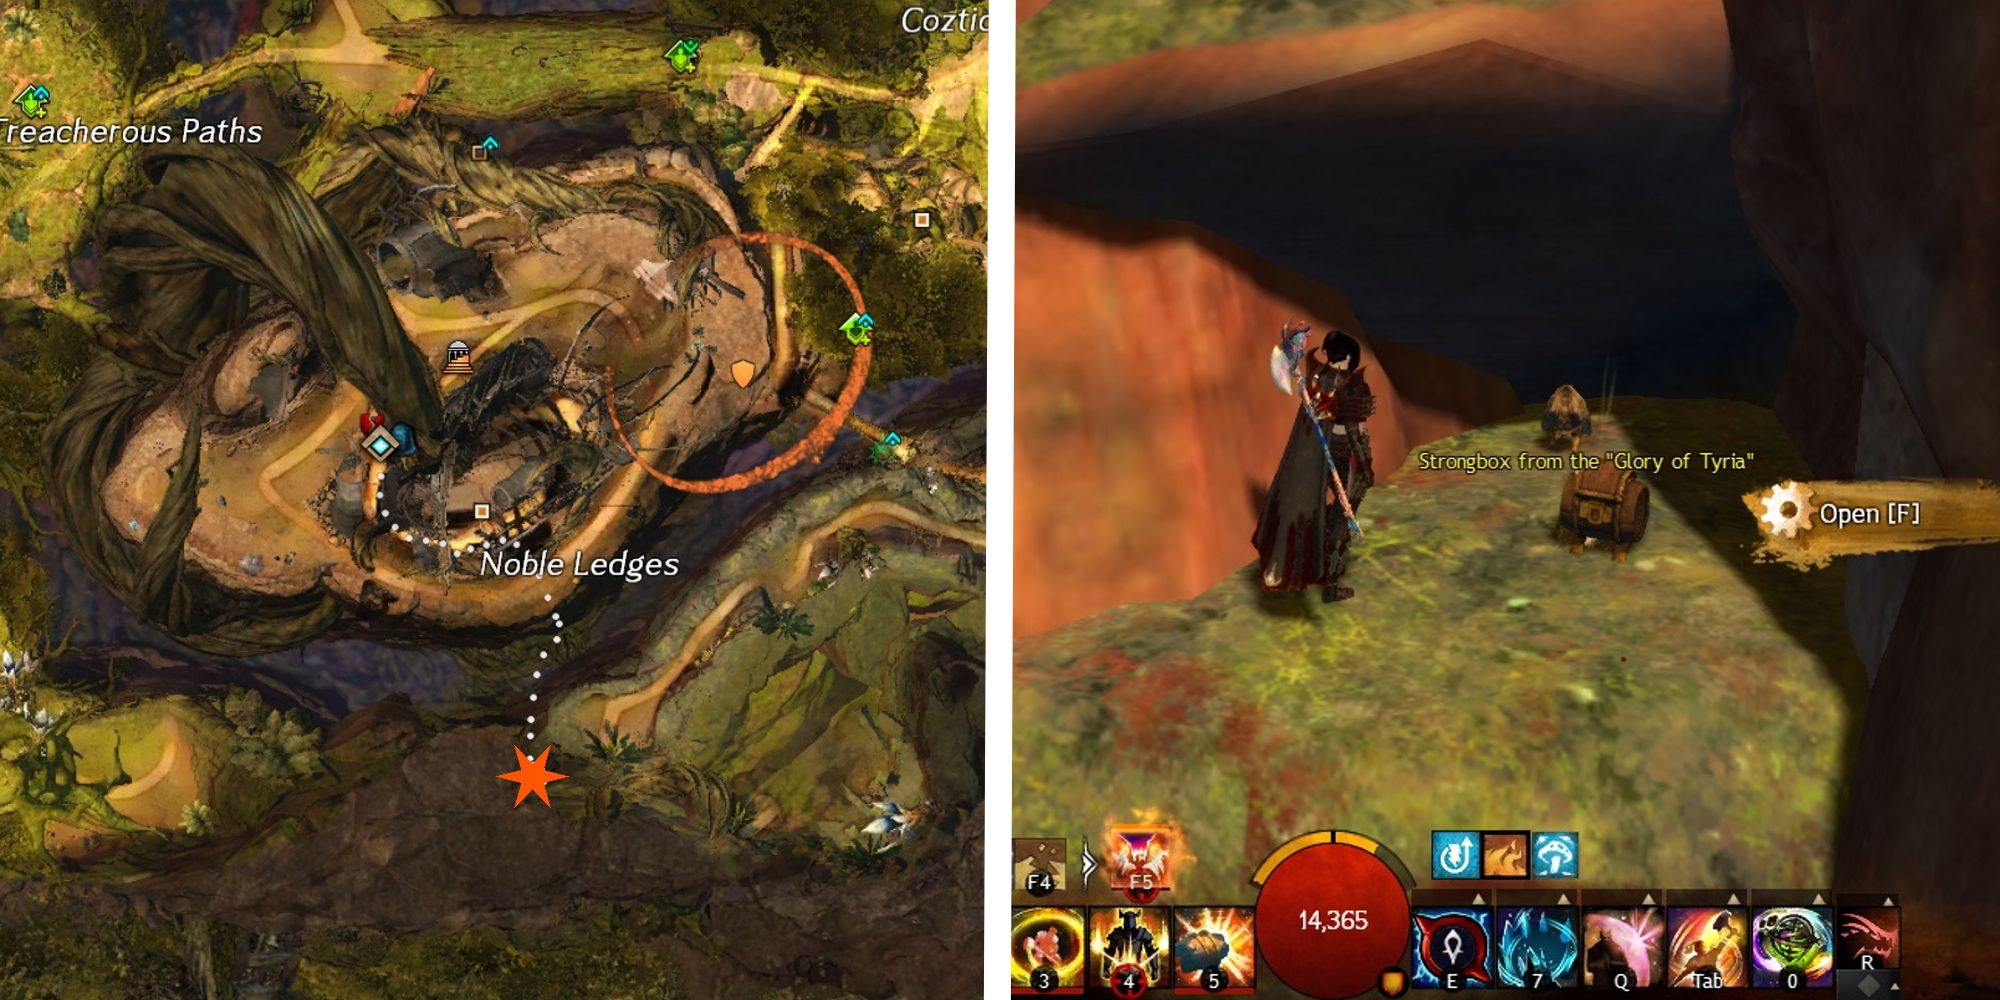 glory of tyria strongbox map location next to image of player opening chest